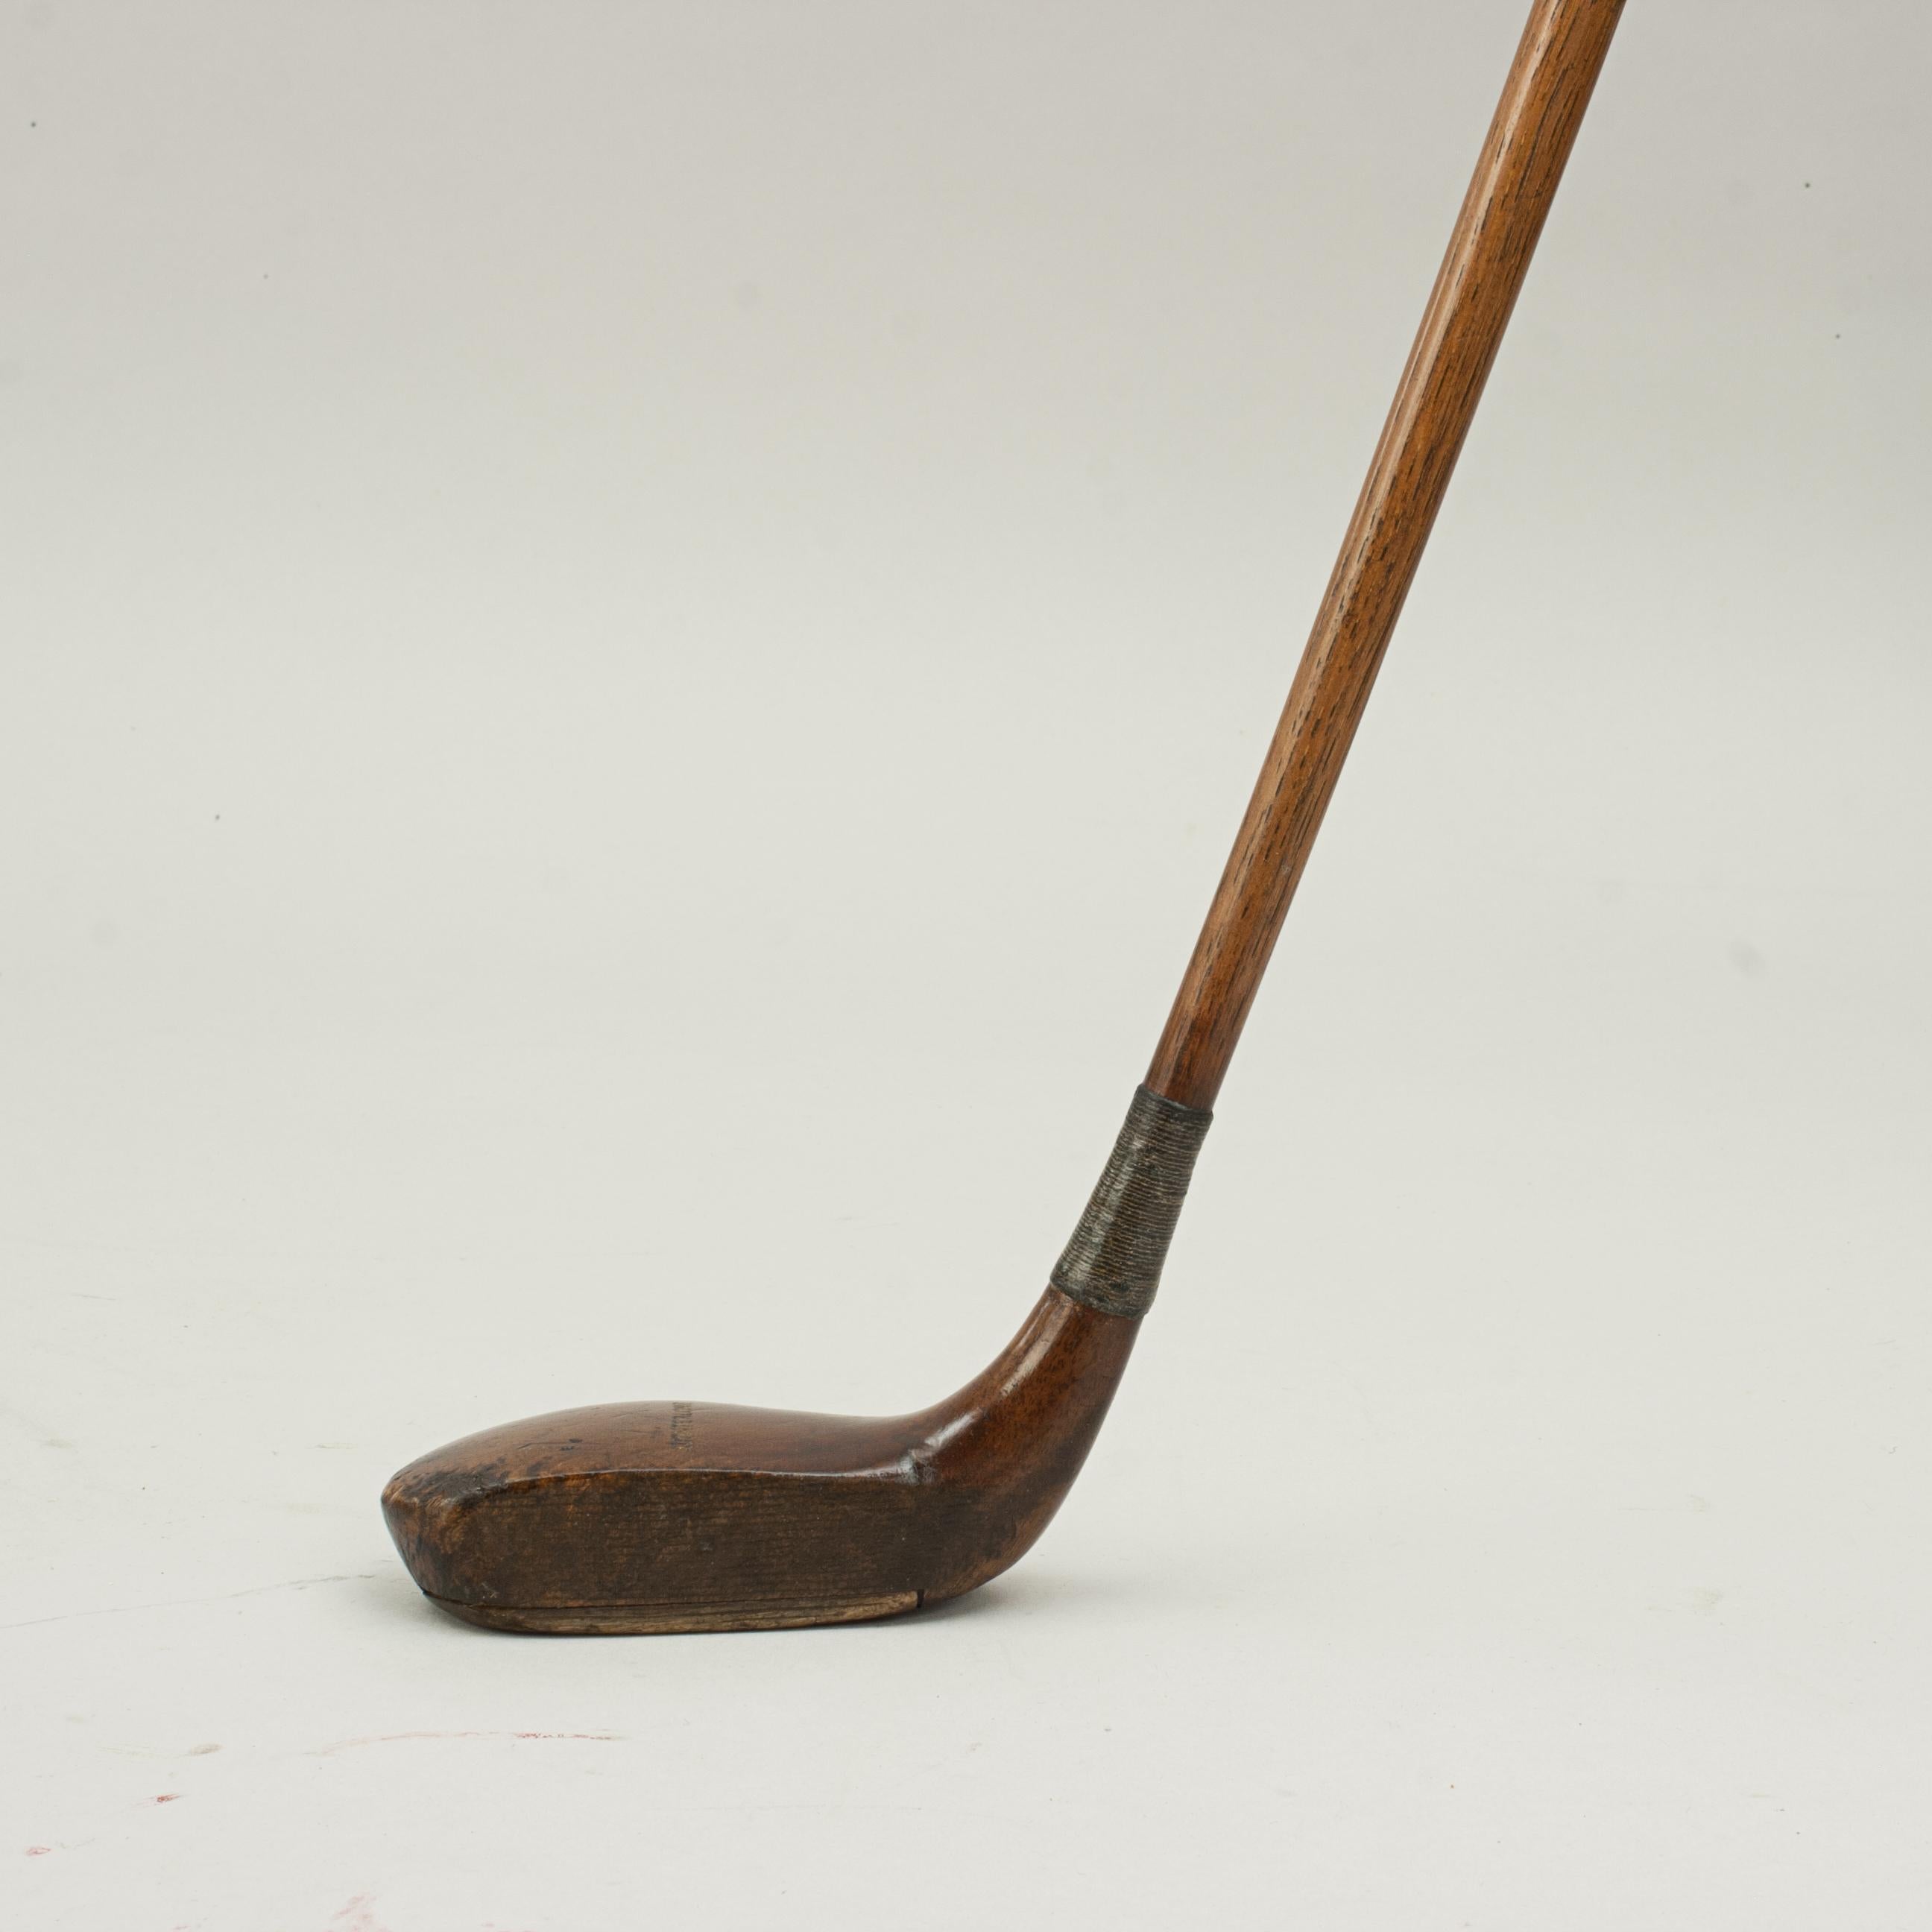 Antique Auchterlonie Putter, St Andrews.
A very nice socket head putter by Auchterlonie of St Andrews. The golf club has a lead weight to the rear, traditional horn slip along the leading edge of the sole, the polished wooden head stamped